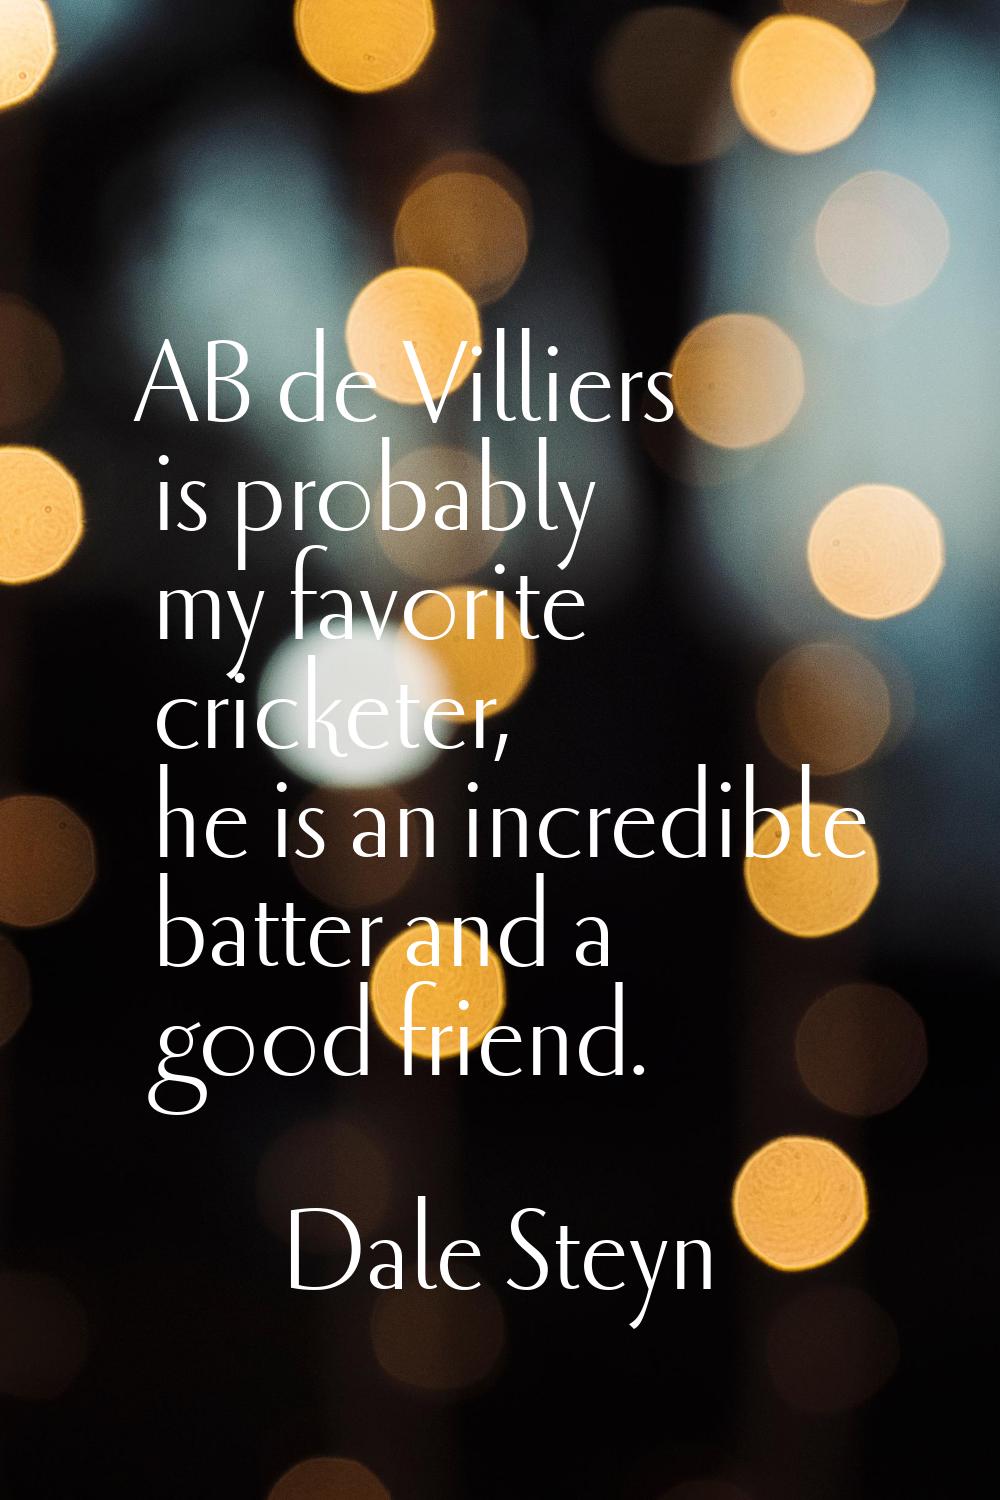 AB de Villiers is probably my favorite cricketer, he is an incredible batter and a good friend.